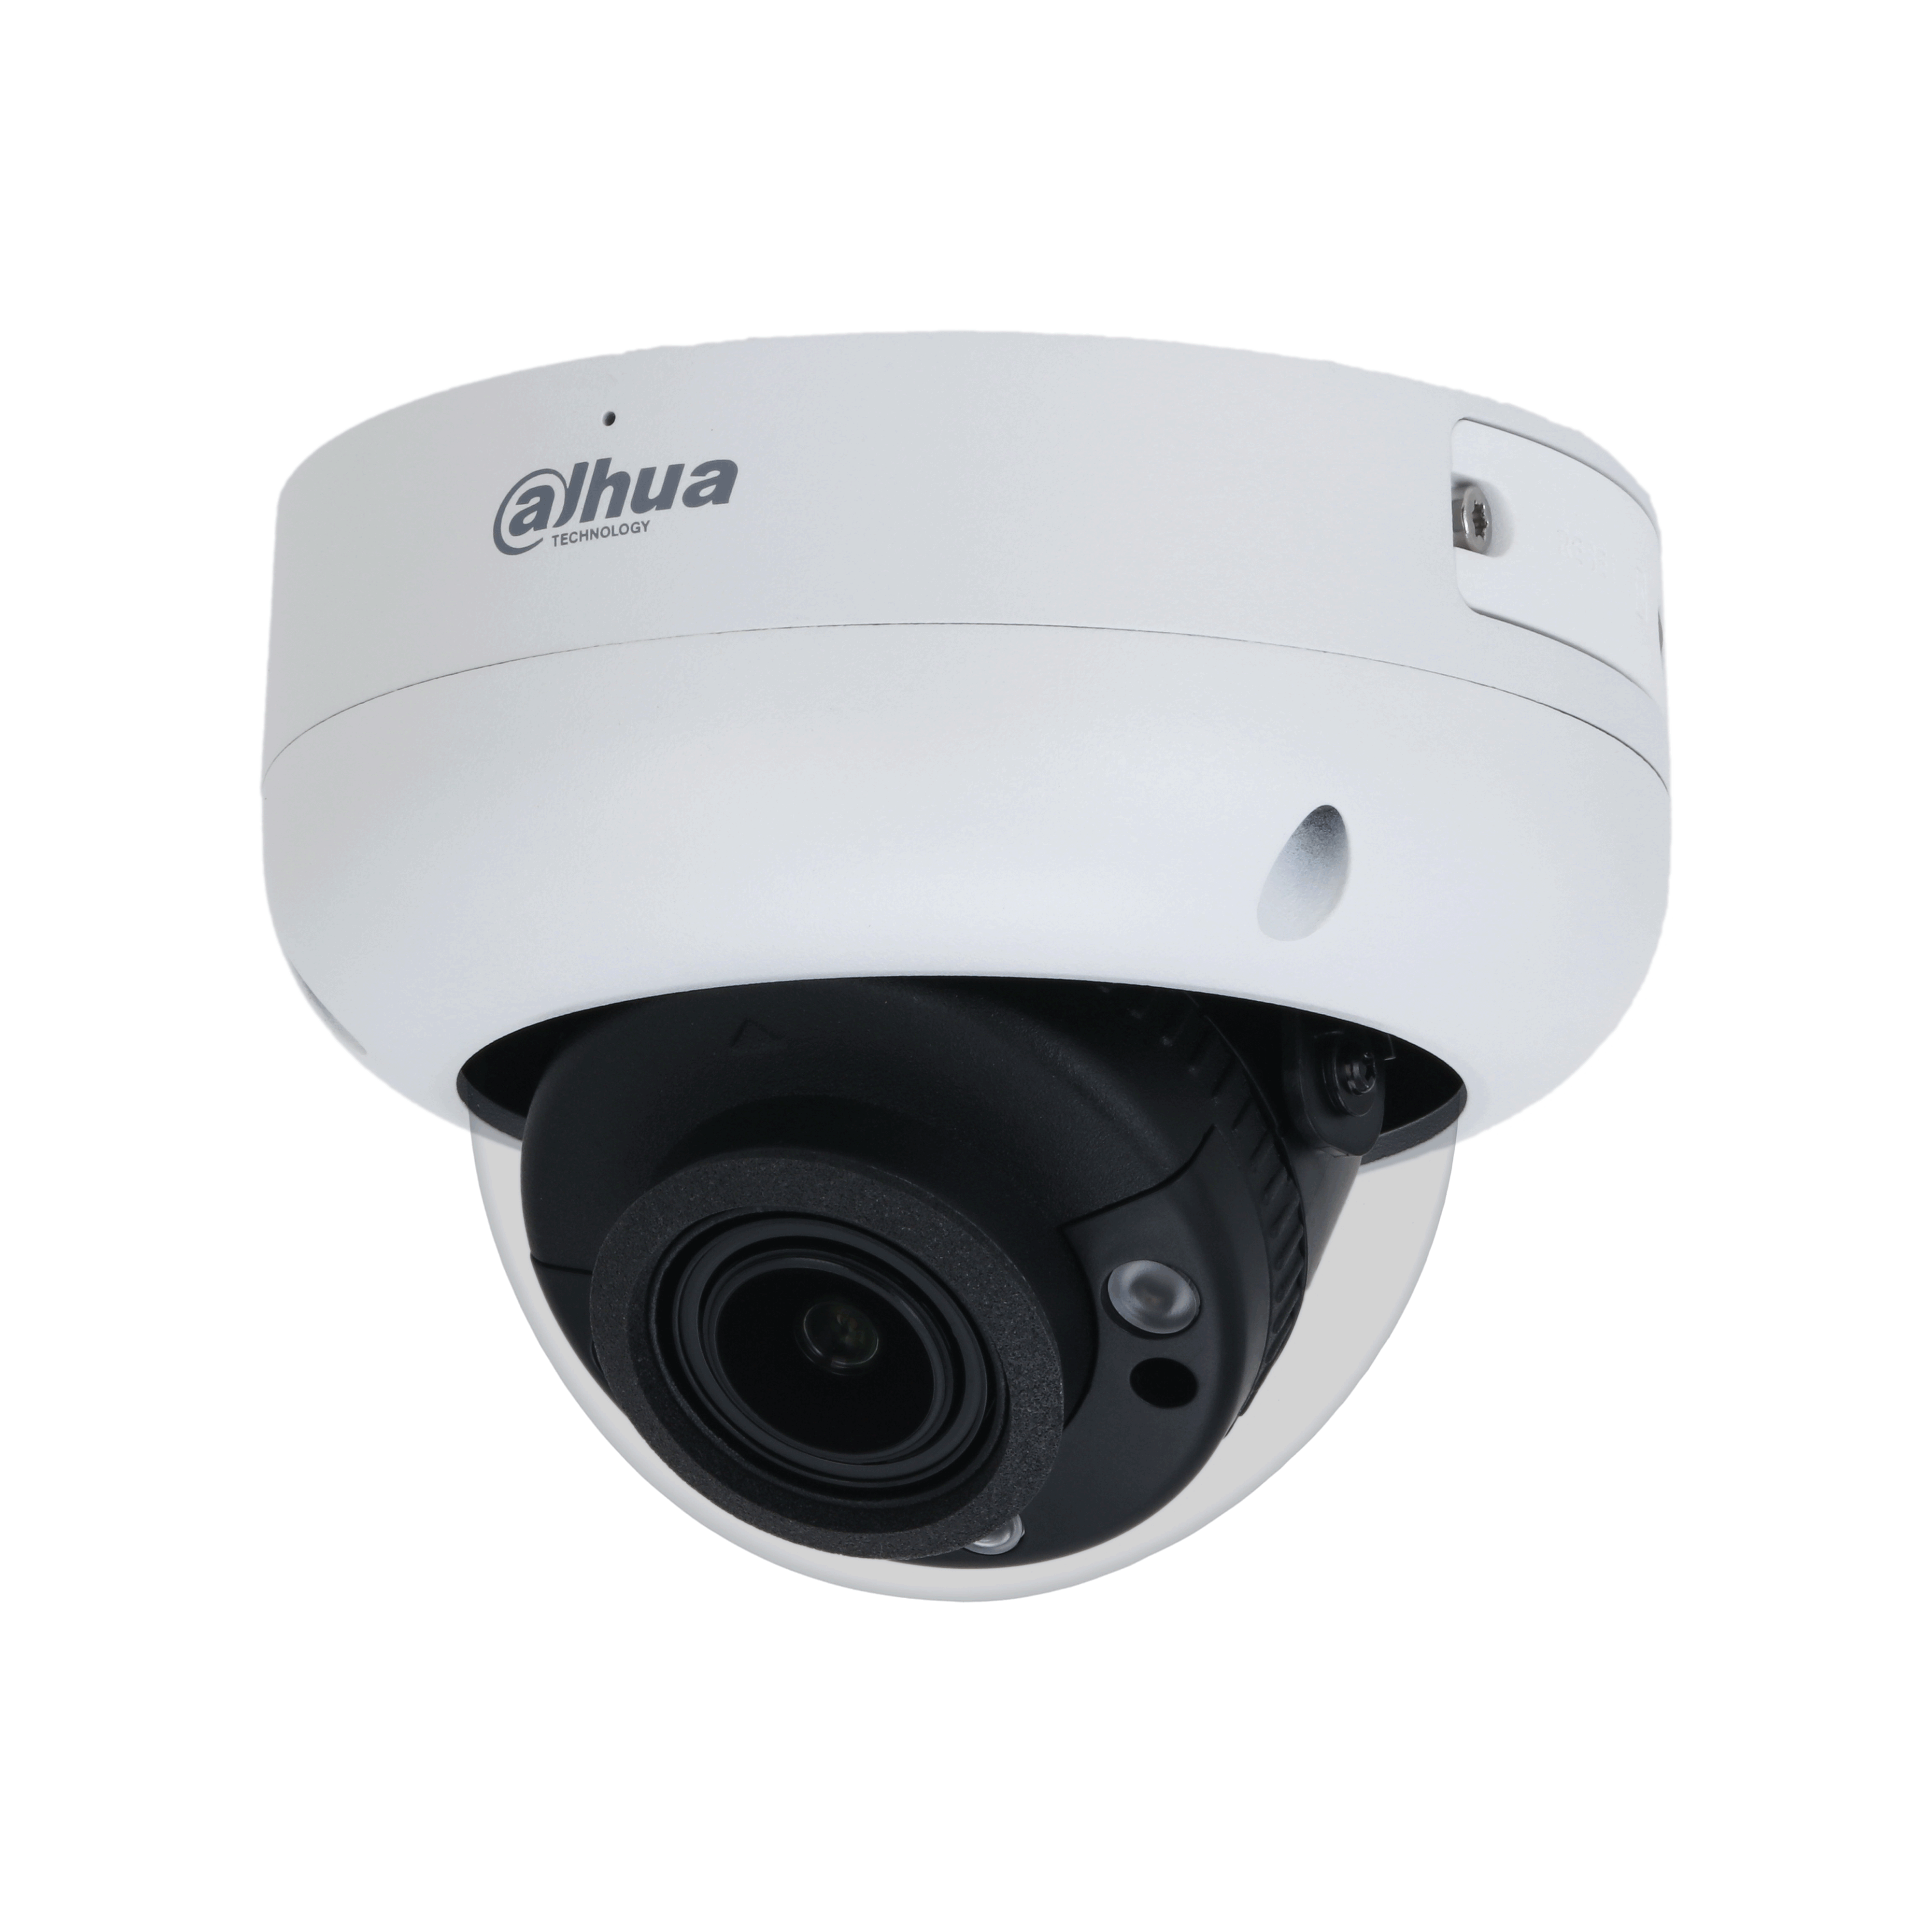 WIZSENSE SERIES IP CAMERA WHITE 6MP H.264/4+/5/5+ DOME 120 WDR METAL 2.7-13.5MM MOTORISED LENS 5X ZOOM STARLIGHT IR 40M POE IP67 BUILT IN MIC AUDIO IN AUDIO OUT 1 x ALARM IN 1 x ALARM OUT SUPPORT UP TO 256GB SD IK10 12VDC